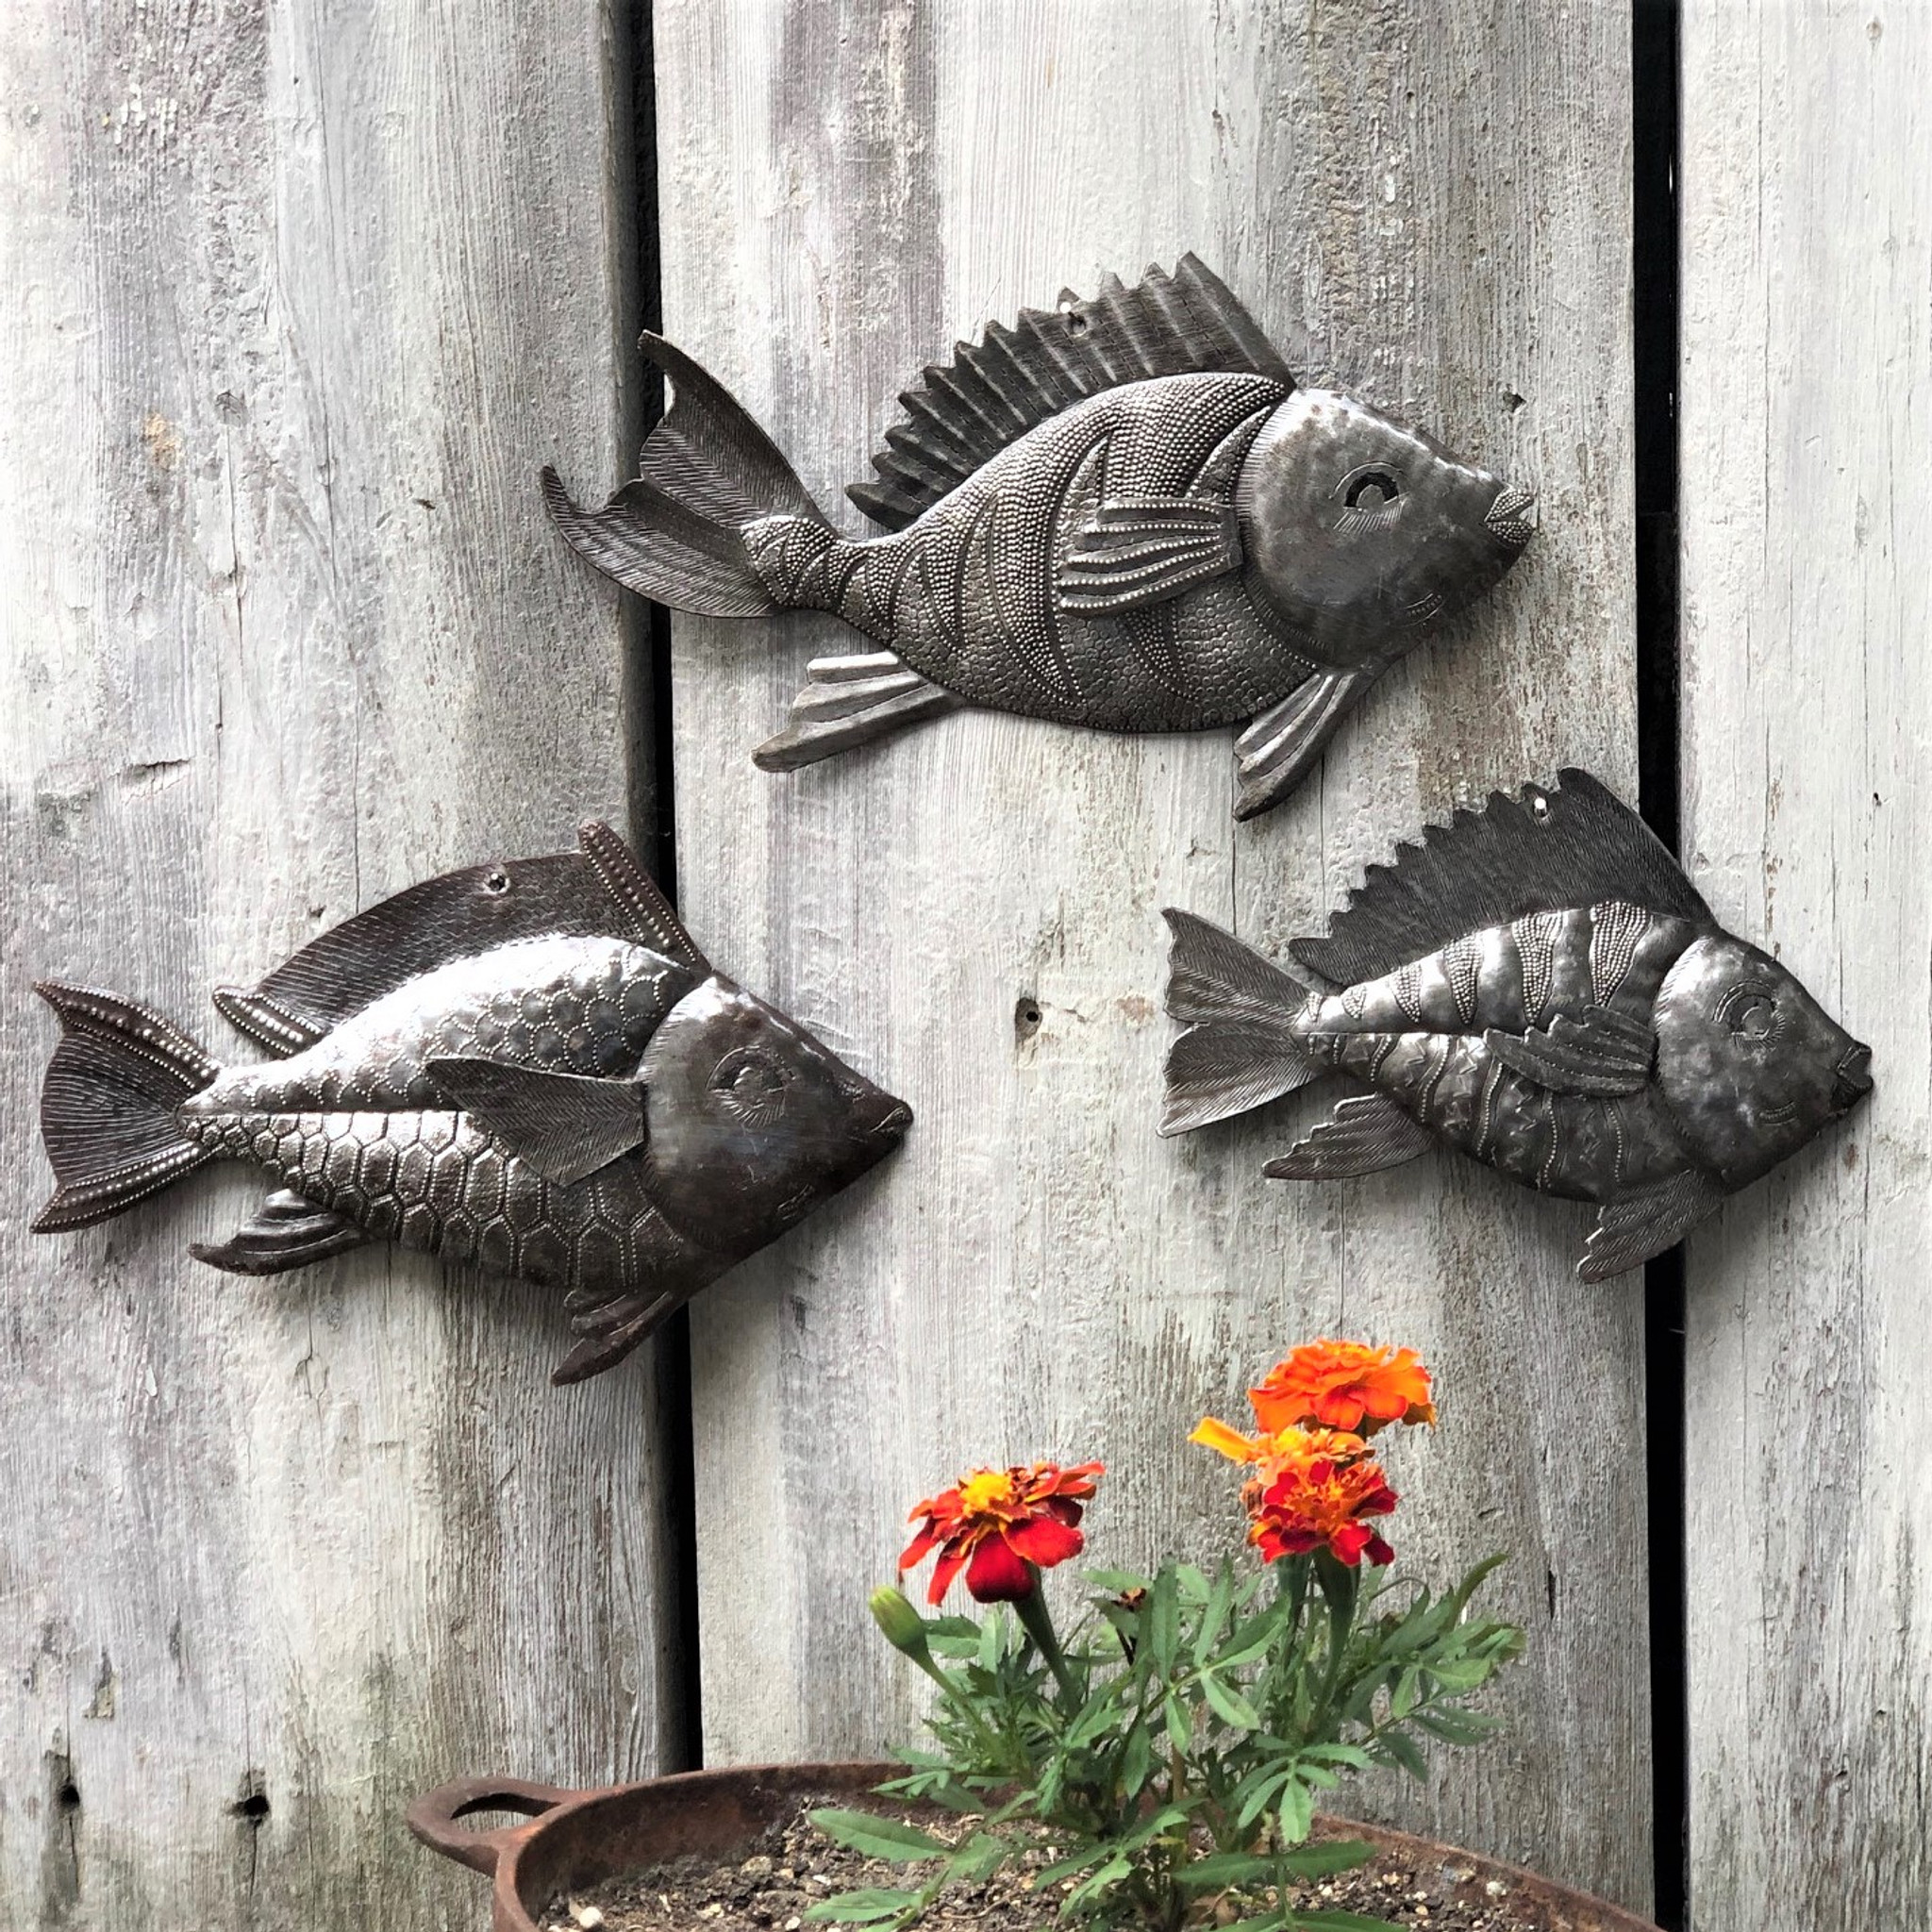 Metal art Haiti,School of fish, Nautical Fish, Set of 3, Wall Hanging,  Beach Themed Home Decor, Whimsical, Catch of The Day